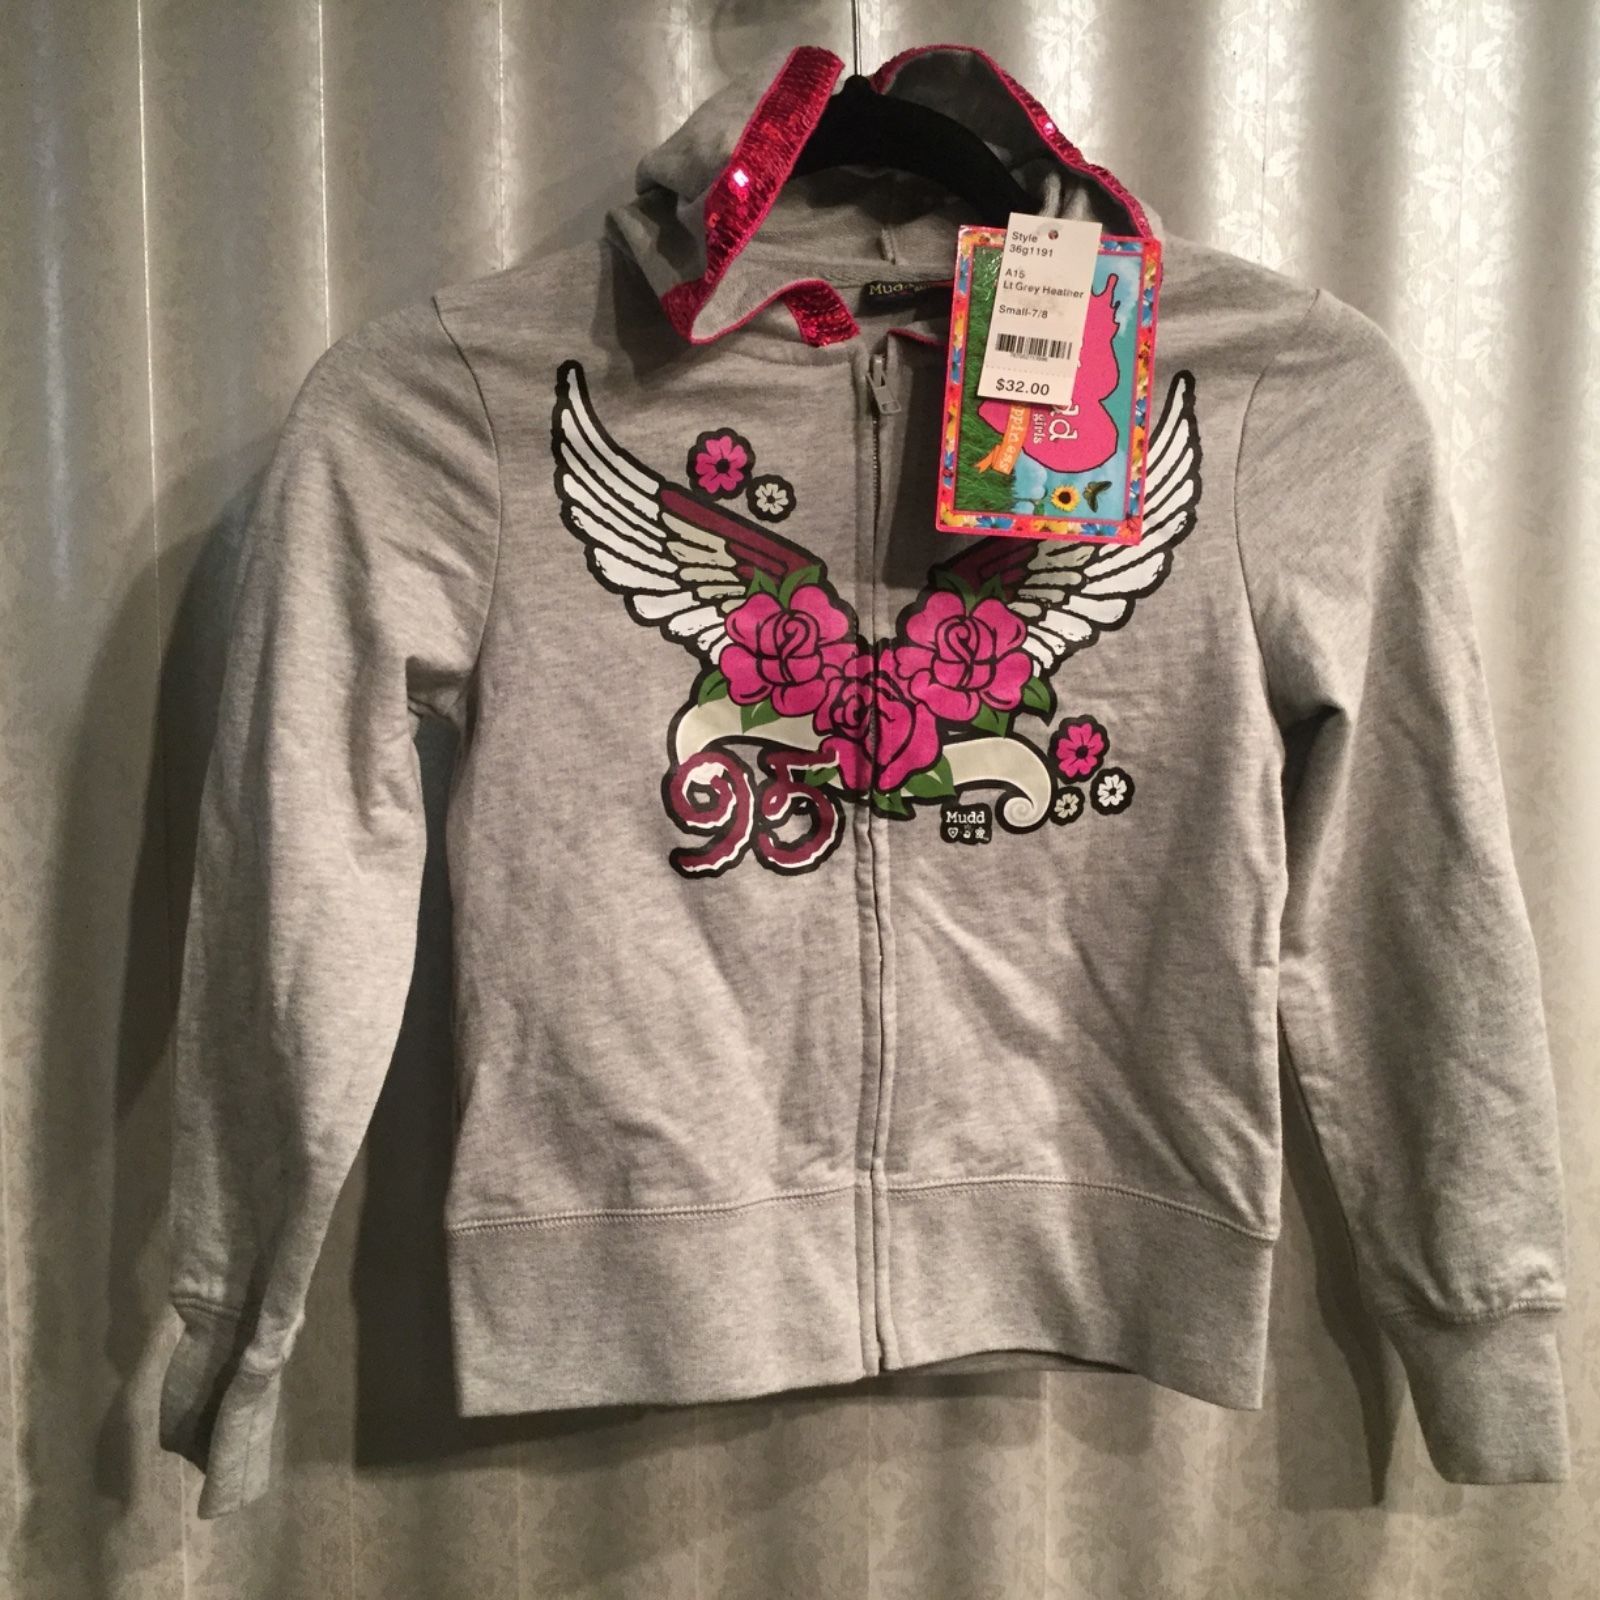 NWT Mudd Girls Gray Hoodie Jacket Sequins Roses Small - $16.00